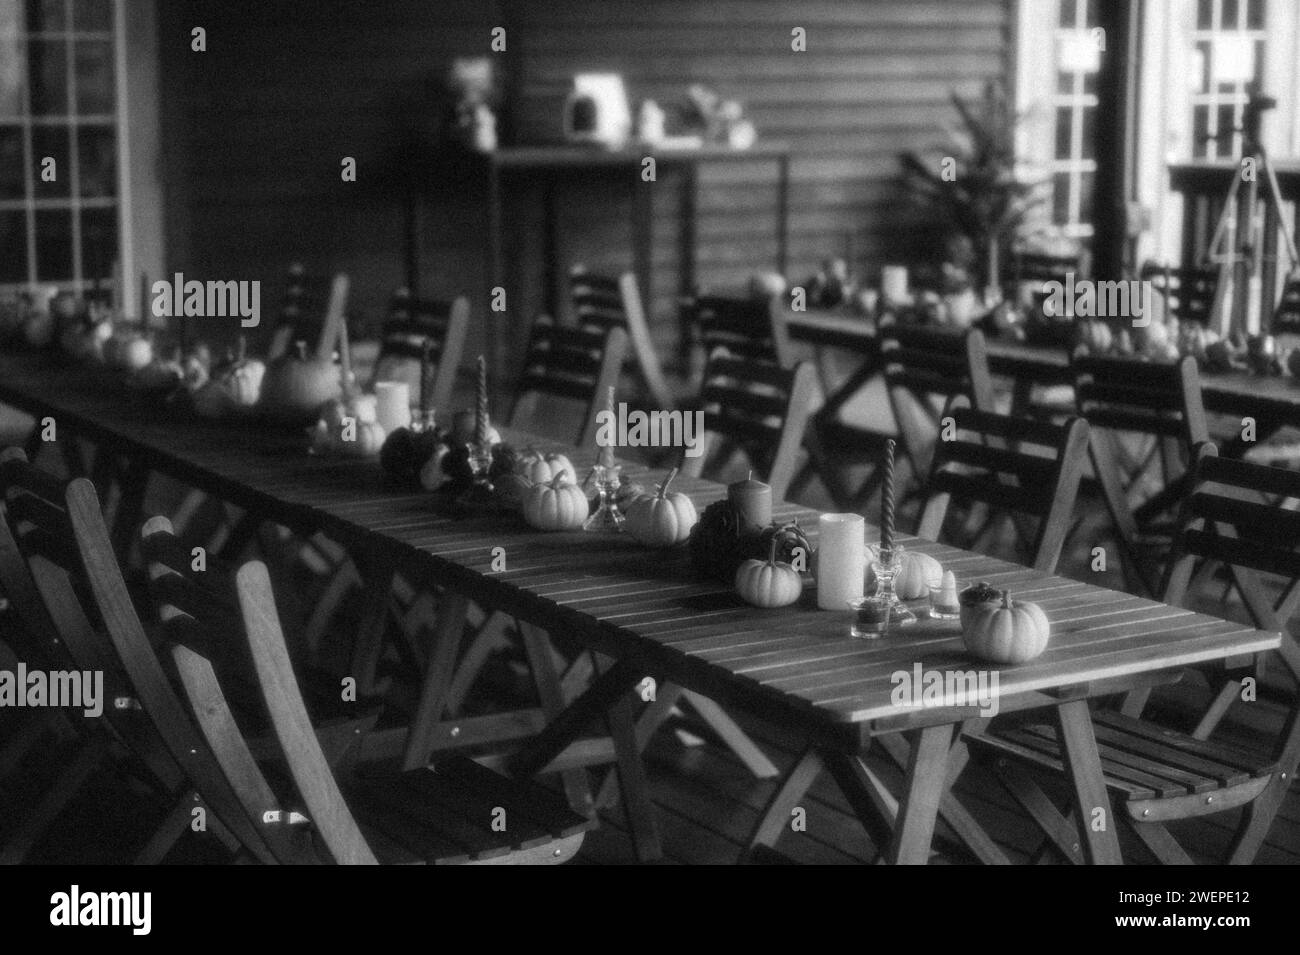 A harvest dinner setup adorned with wooden chairs Stock Photo